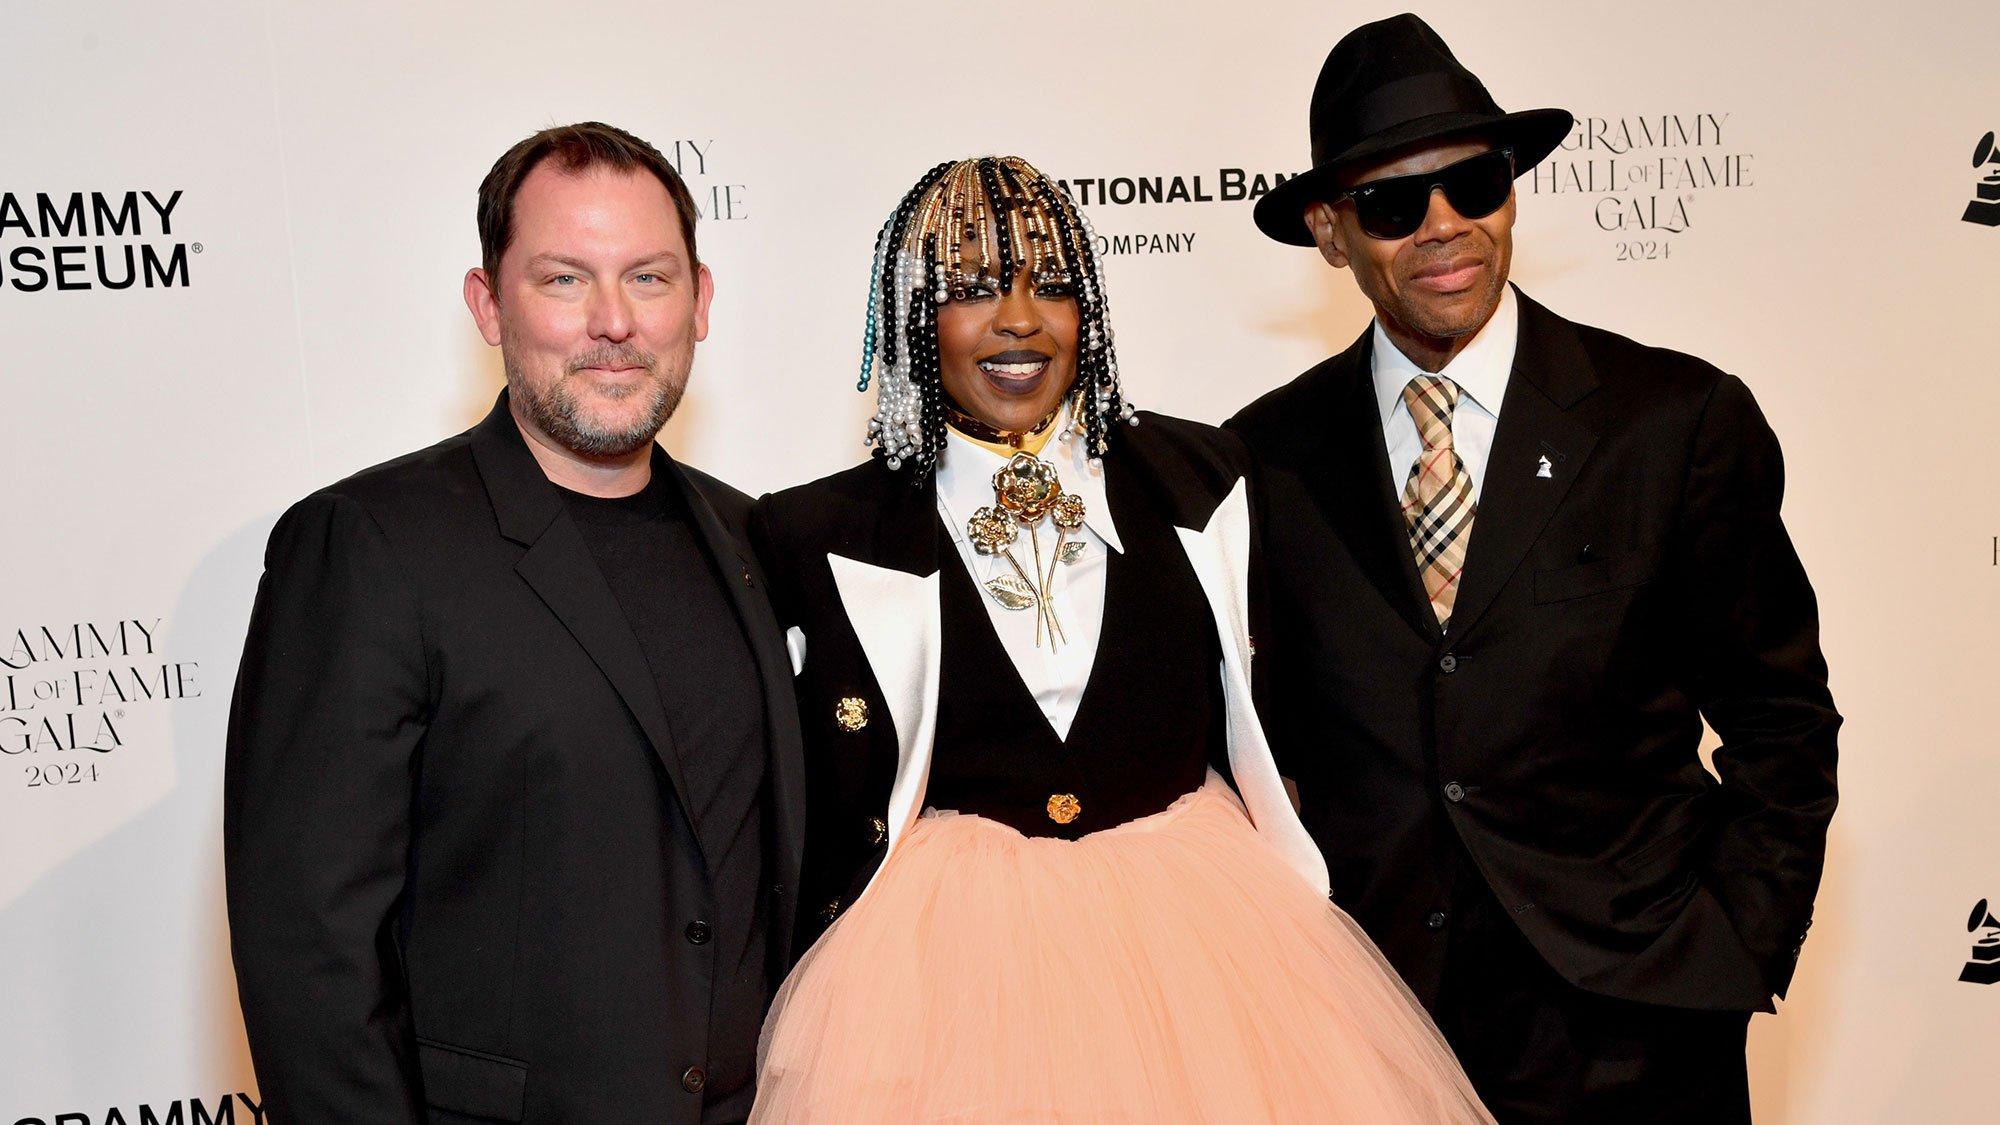 Michael Sticka, President/CEO of the GRAMMY Museum, Lauryn Hill, and Jimmy Jam